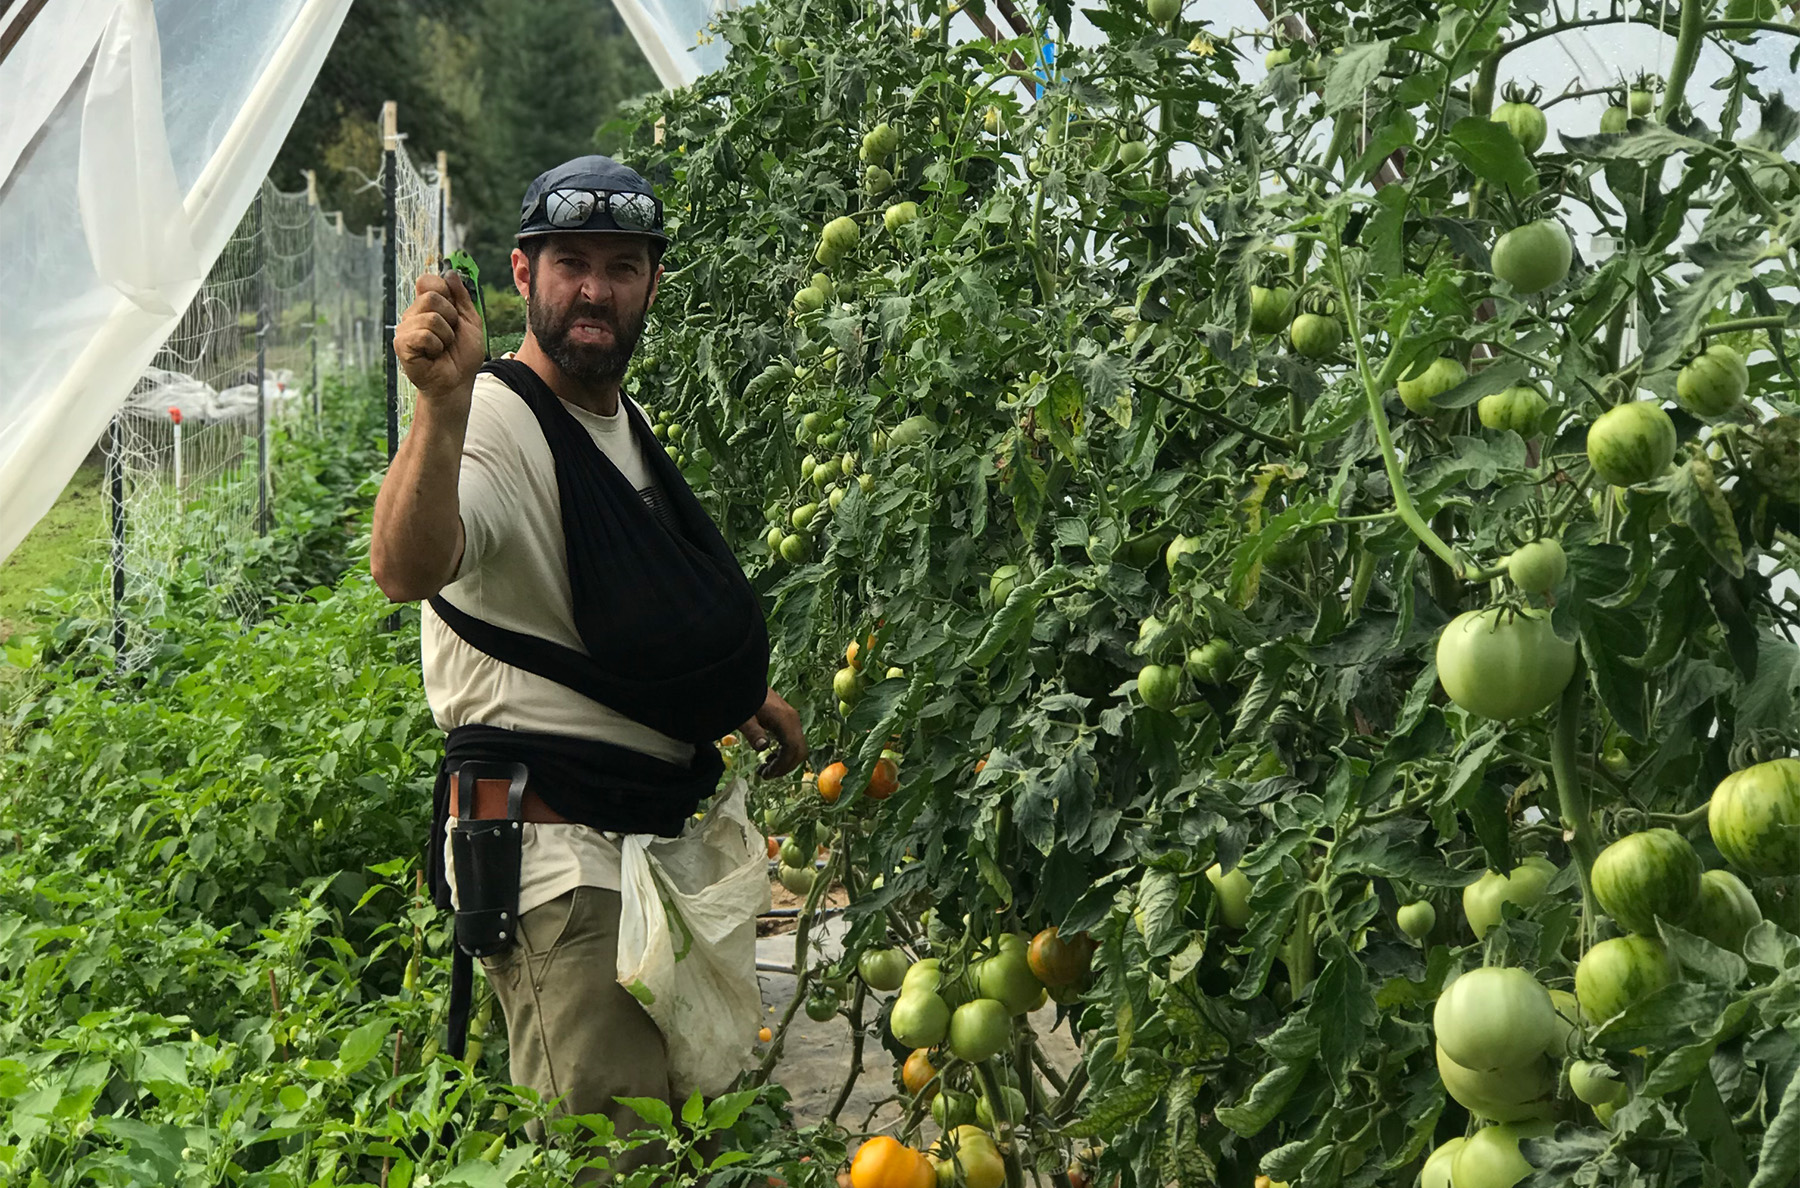 Why did one of the best freeride skiers of the past 20 years become a farmer? On our Blister Podcast, we talk to Chris Rubens about starting First Light Farm with his partner, Jesse, in Revelstoke; the parallels between skiing & farming; and why Chris finds farming to be so meaningful.